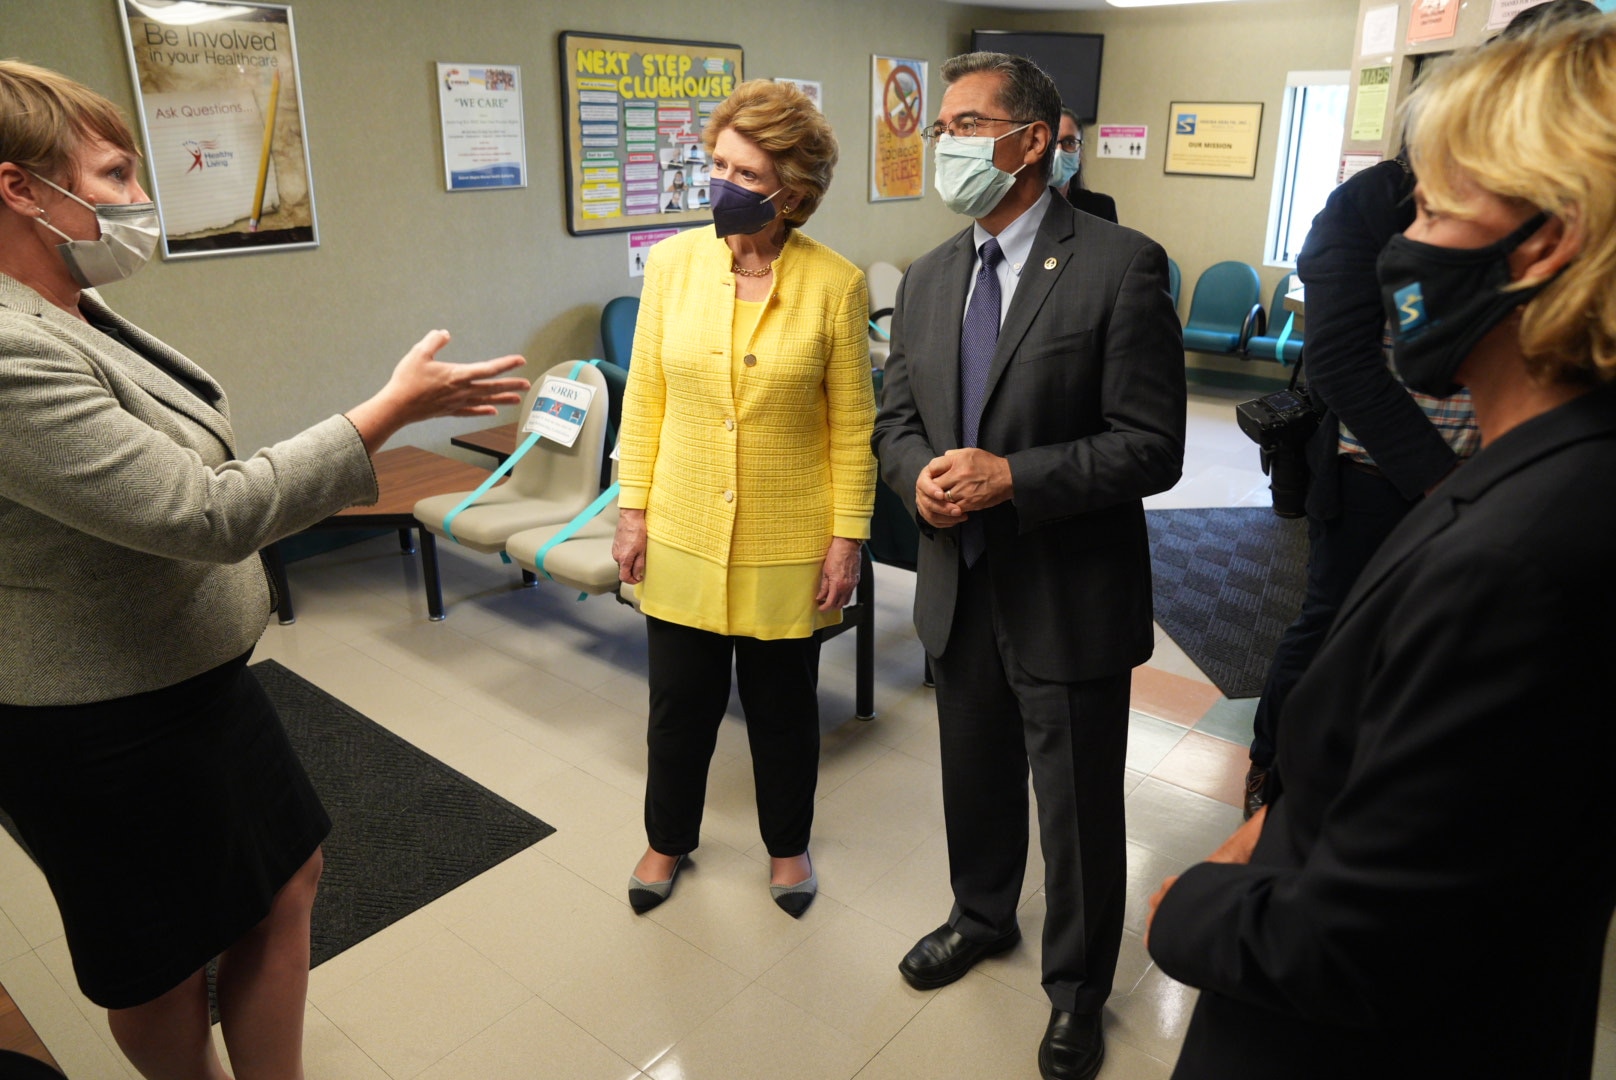 Secretary Becerra is wearing a dark suit with dark rimmed reading glasses and mask, to the right of him is a women wearing a yellow blouse with a dark color mask, in front of Secretary Becerra is a lady wearing a neutral color suit and mask